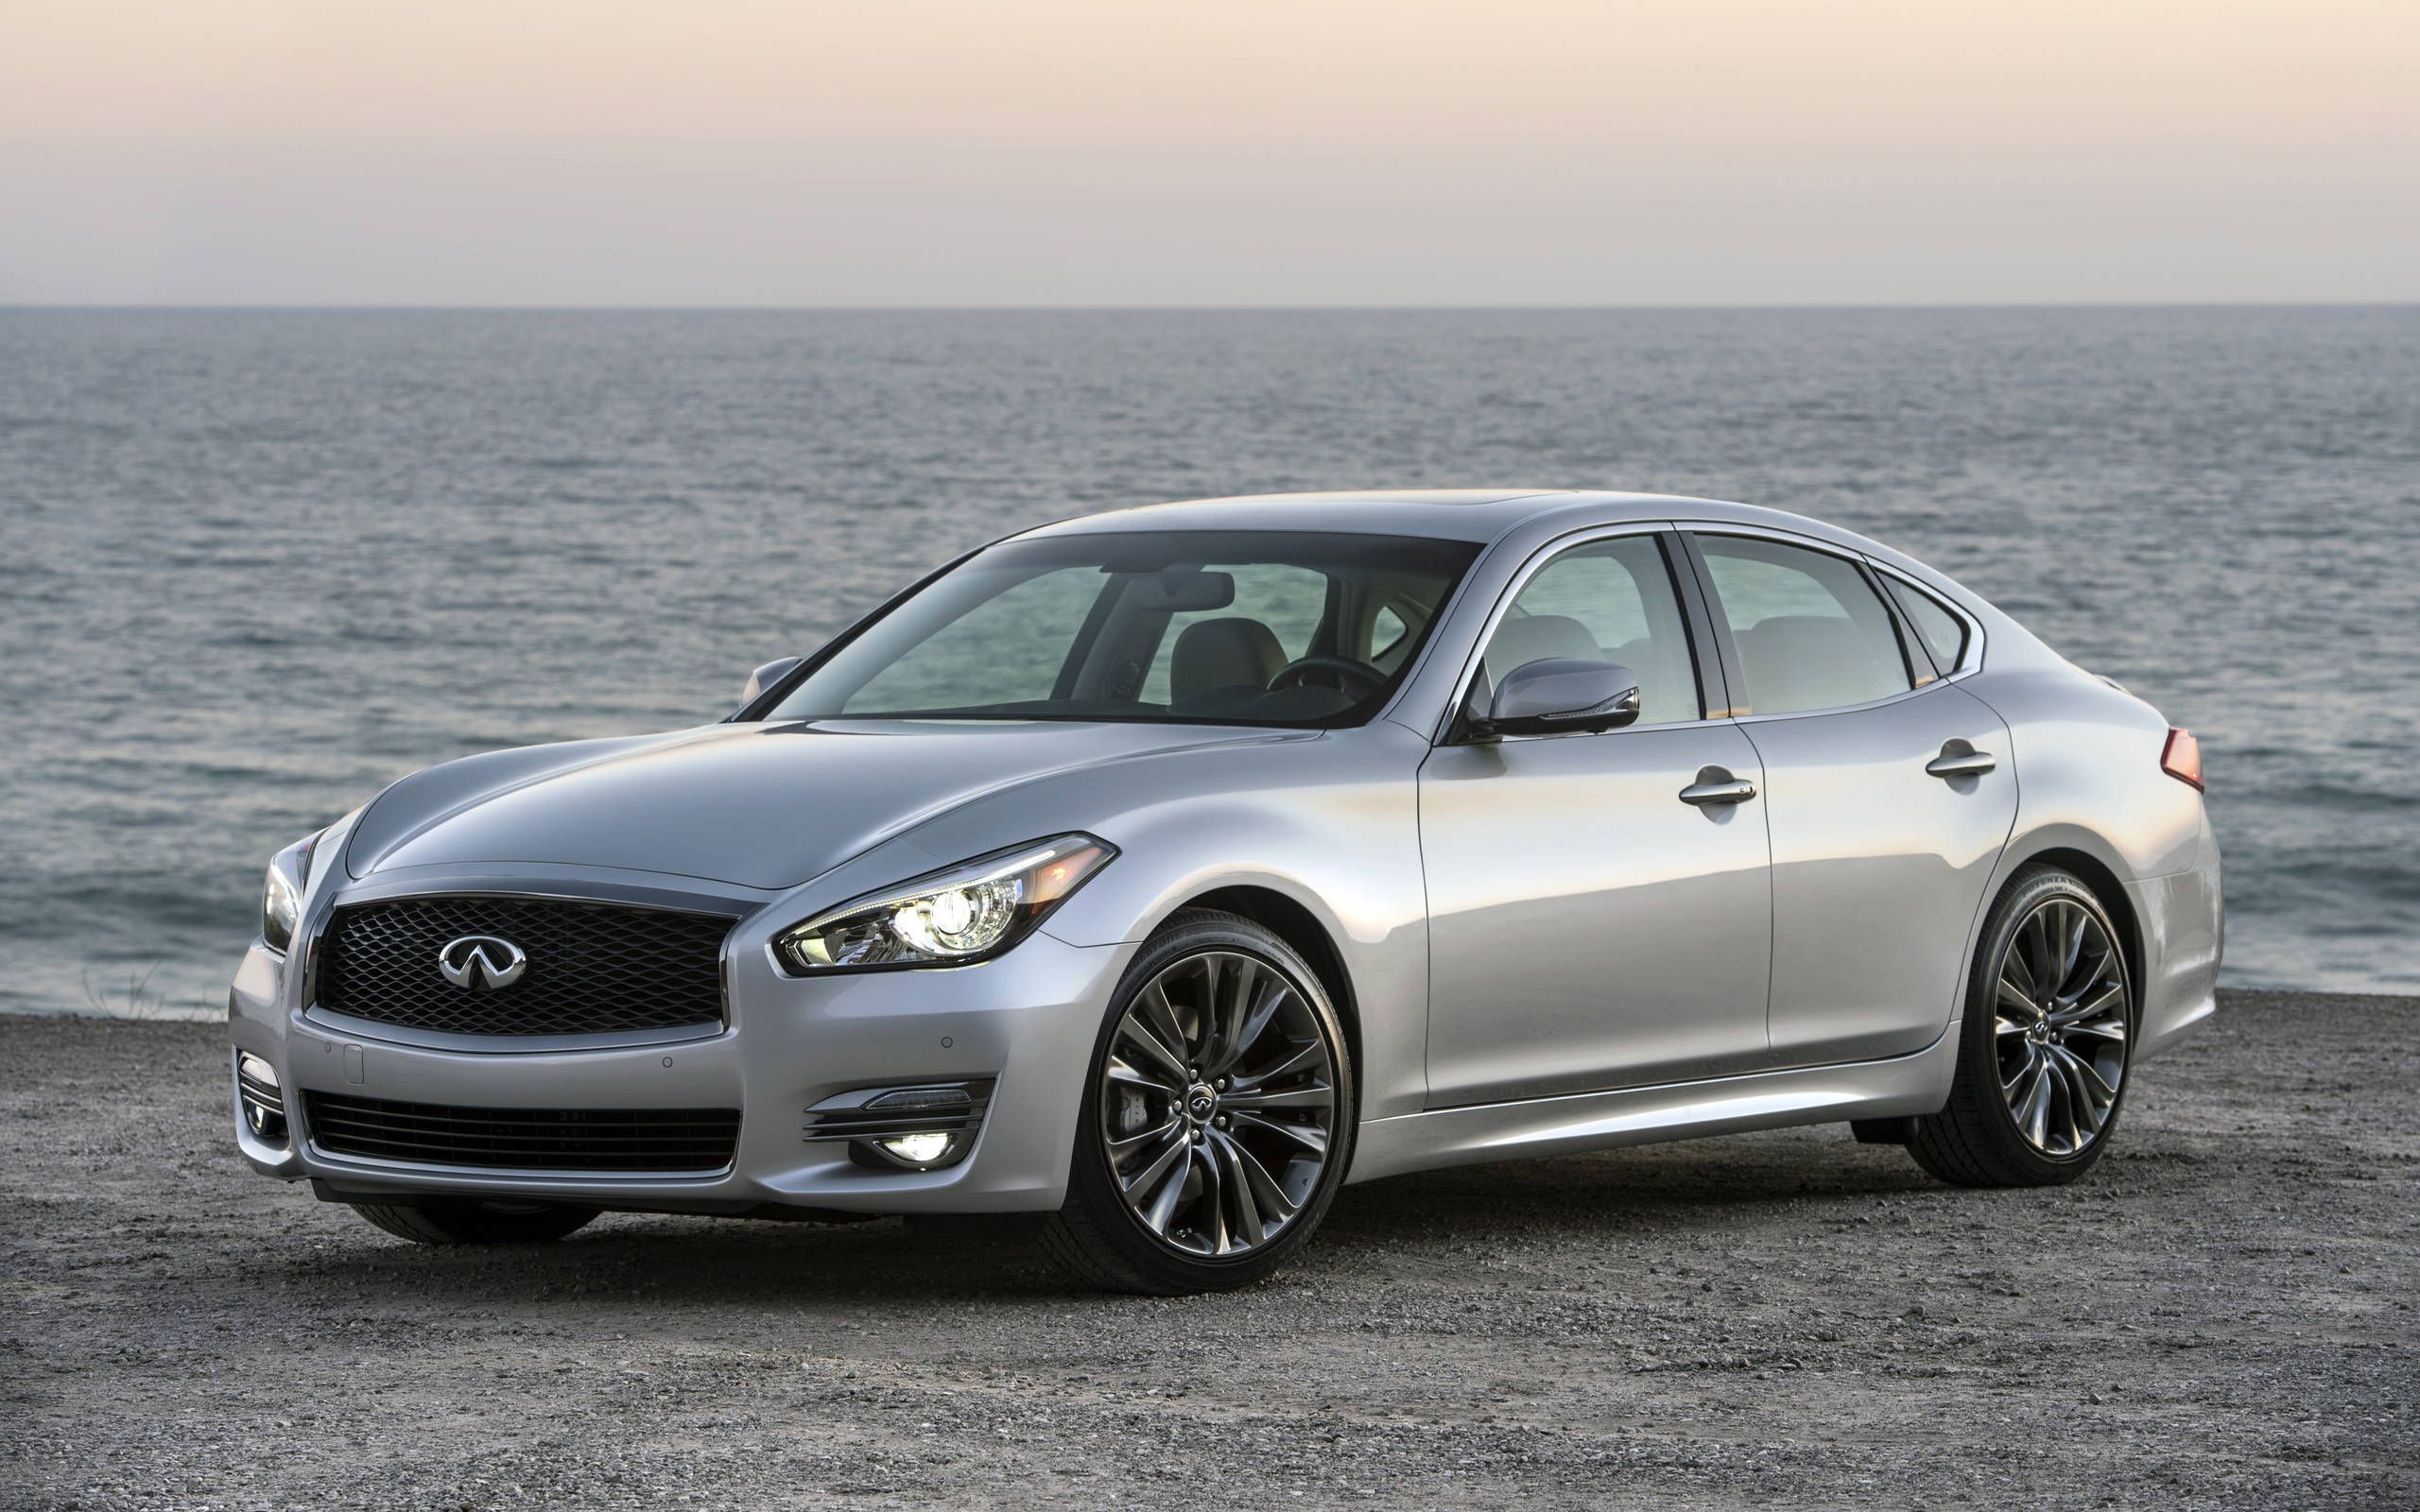 2016 Infiniti Q70 review: Name change aside, an aging luxury muscle car